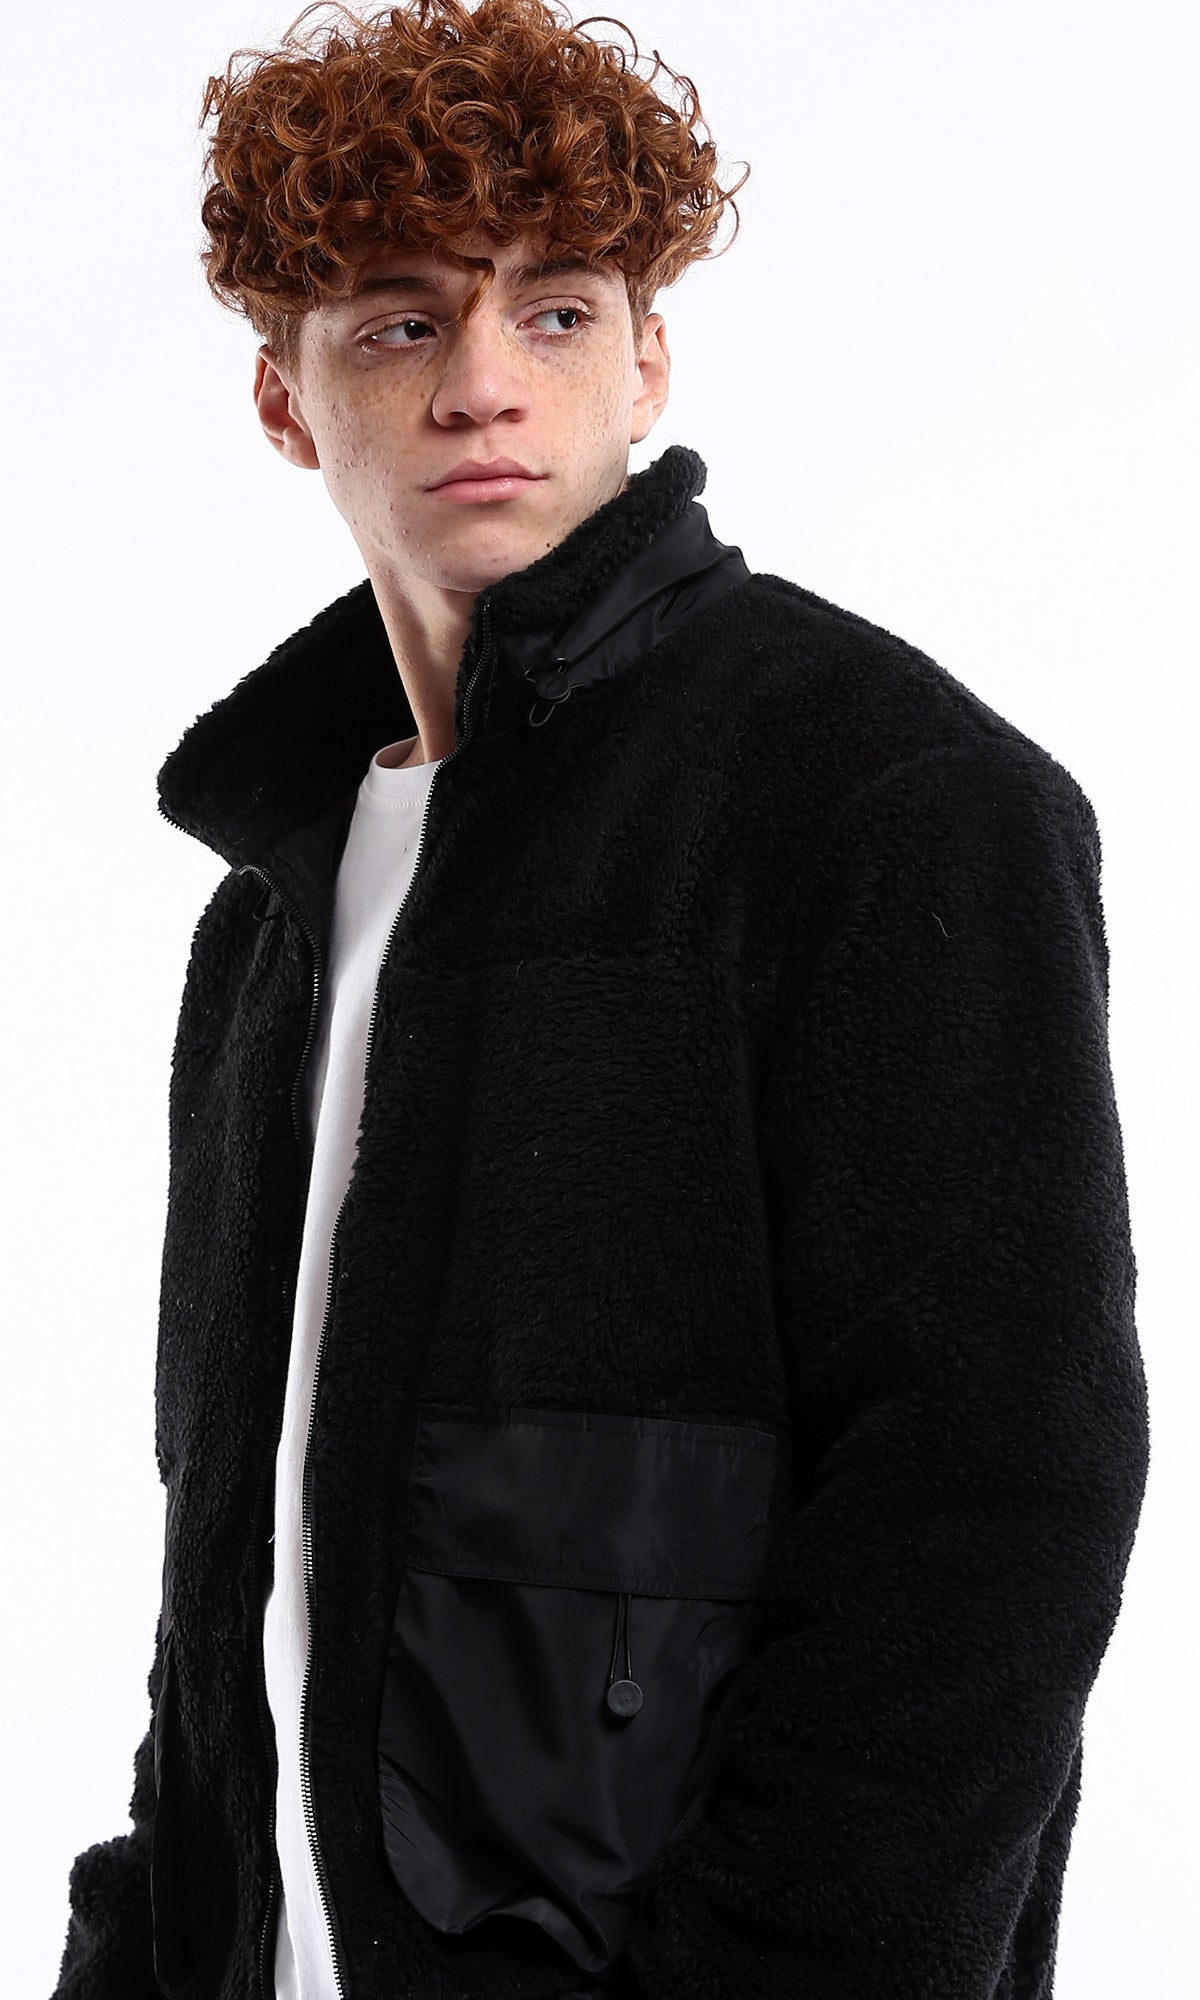 O174754 Black Wool Jacket With Adjustable Stand Collar